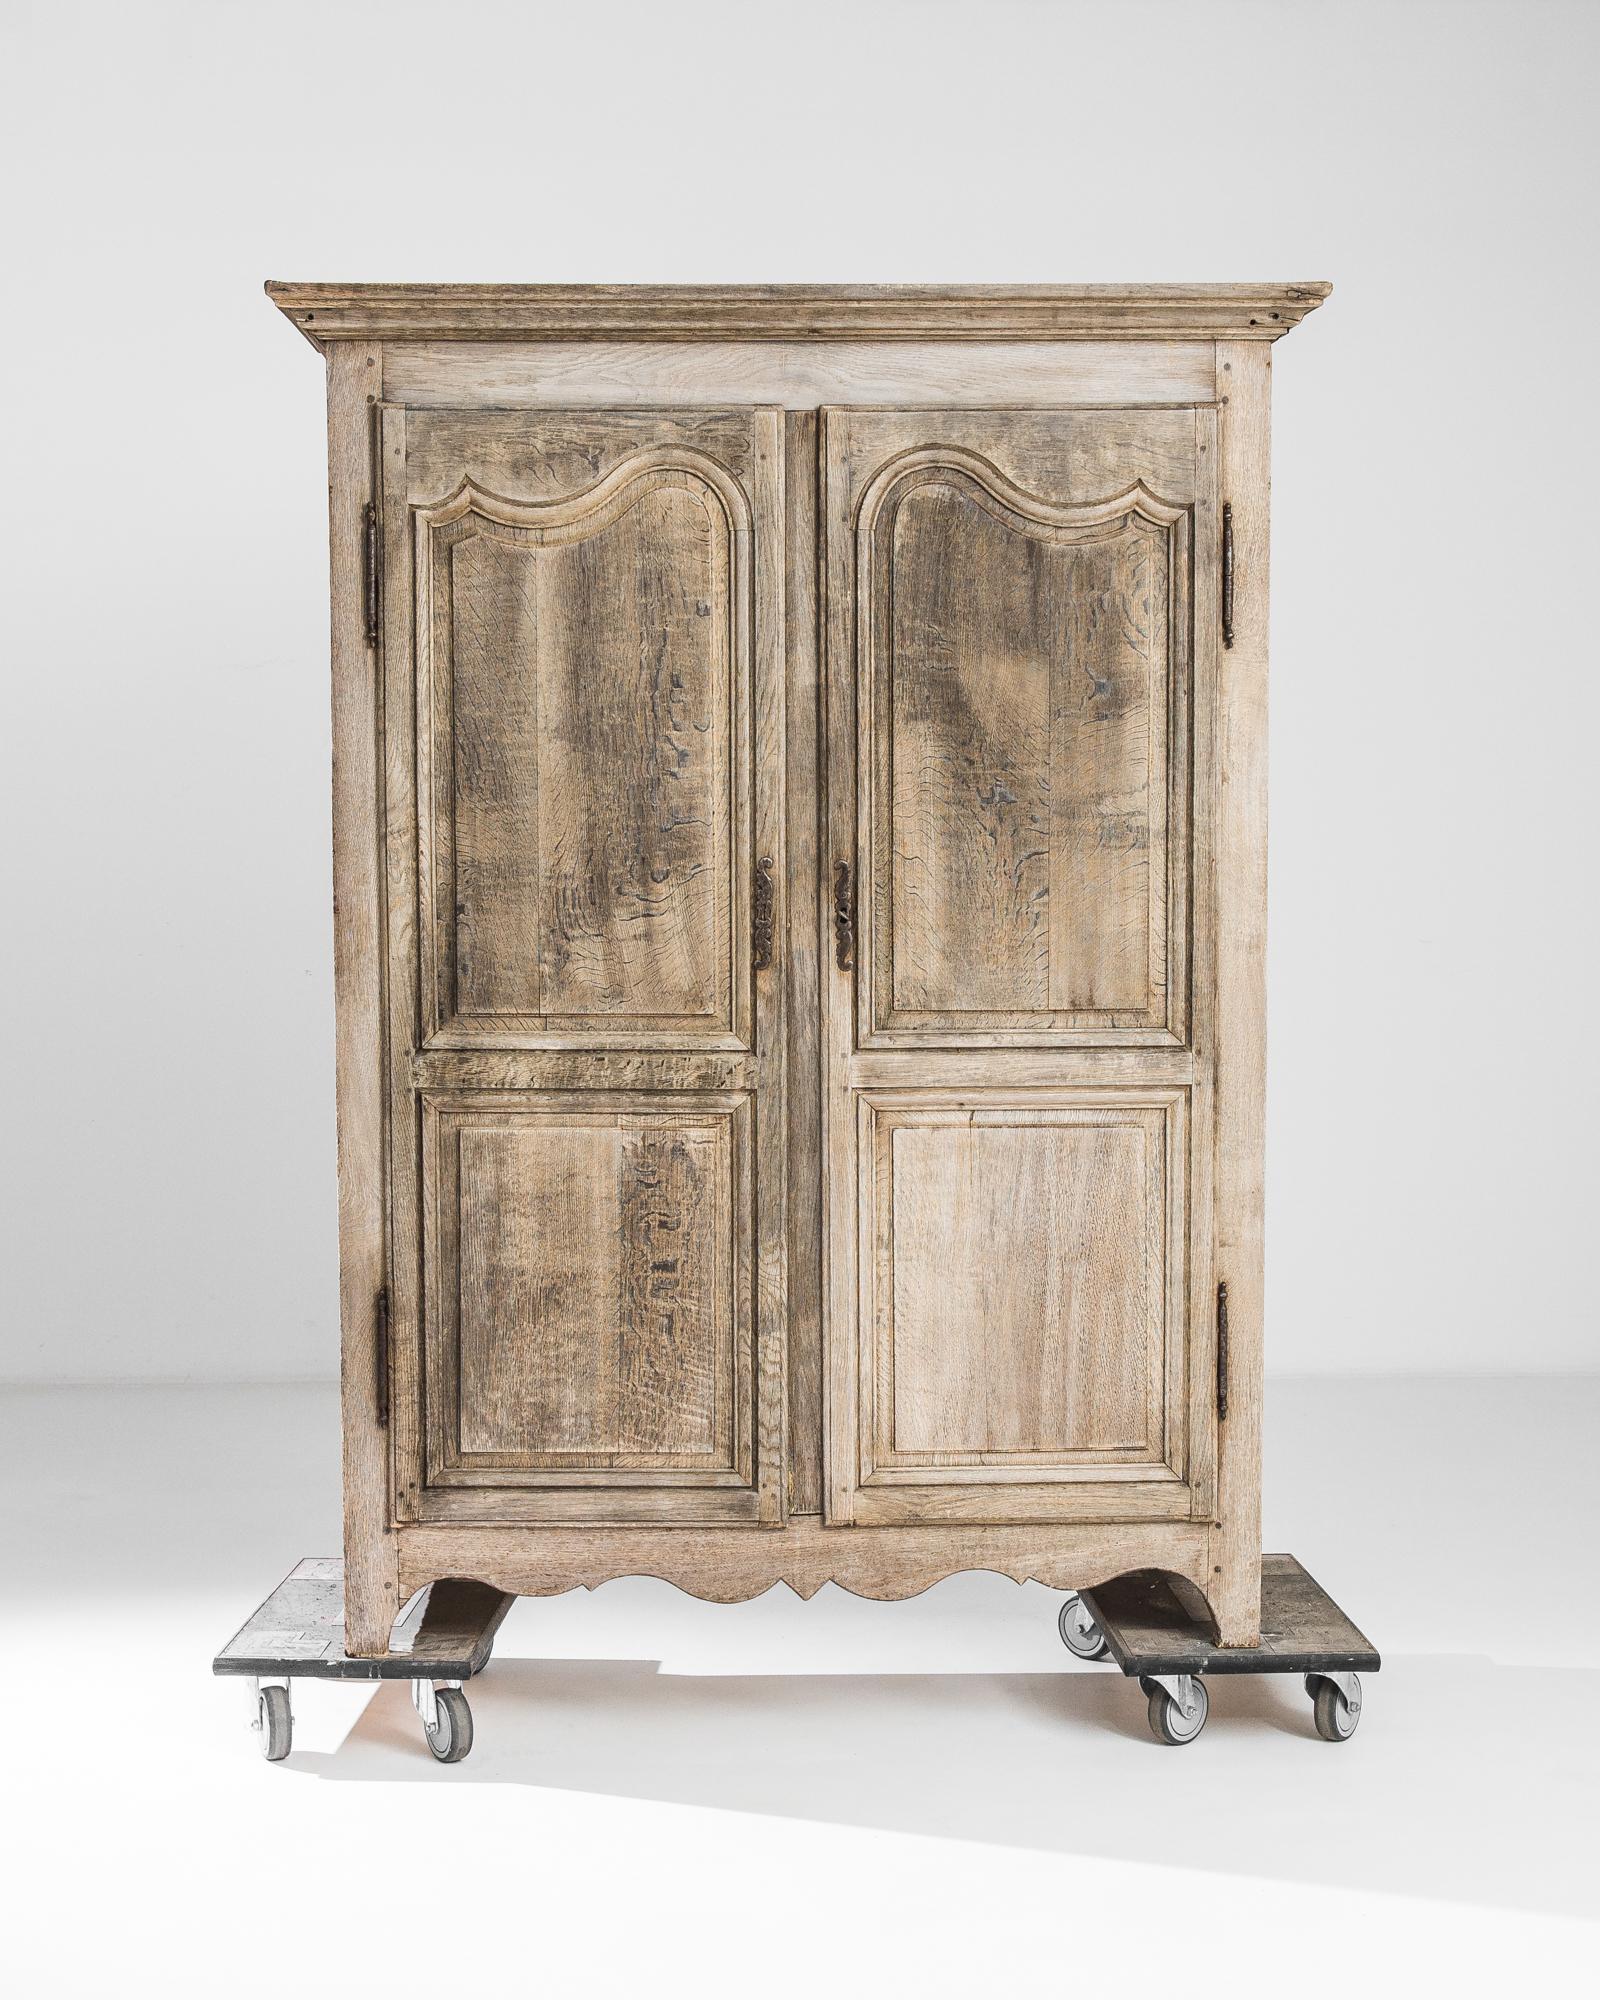 This 1840s French Bleached Oak Cabinet exudes the romantic allure of the French countryside with its rustic yet elegant design. The oak wood, treated delicately through a meticulous bleaching process, breathes new life into the grain, enhancing its